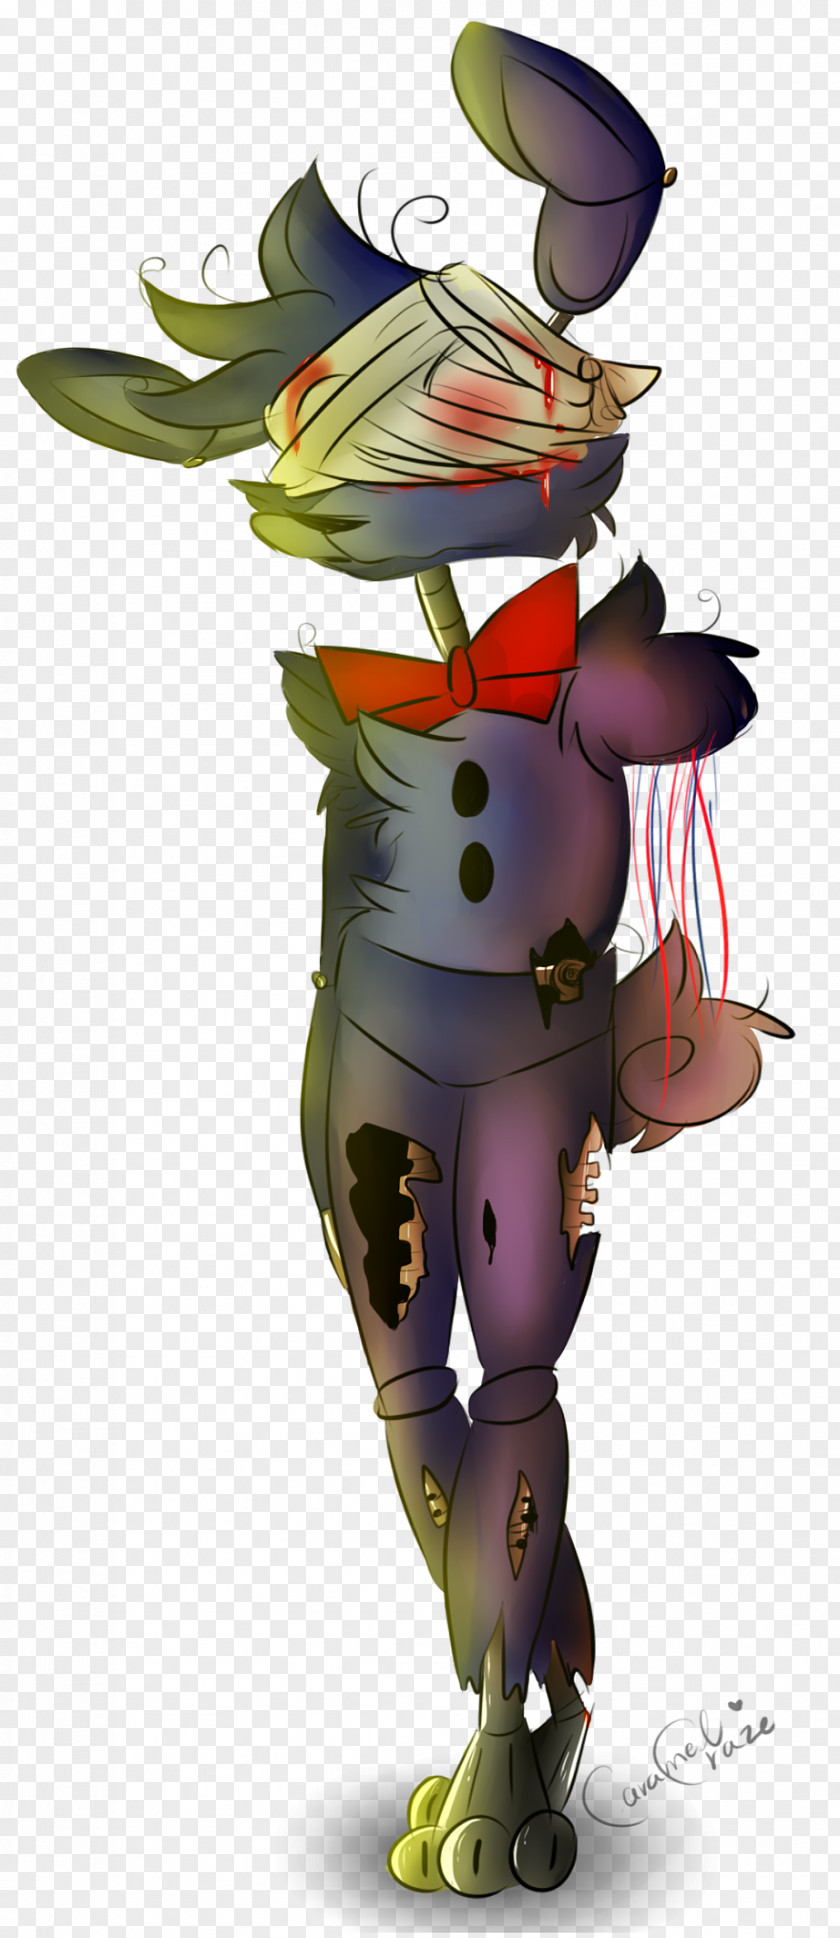 Withered Leaf Five Nights At Freddy's 2 Fan Art Cartoon Drawing PNG